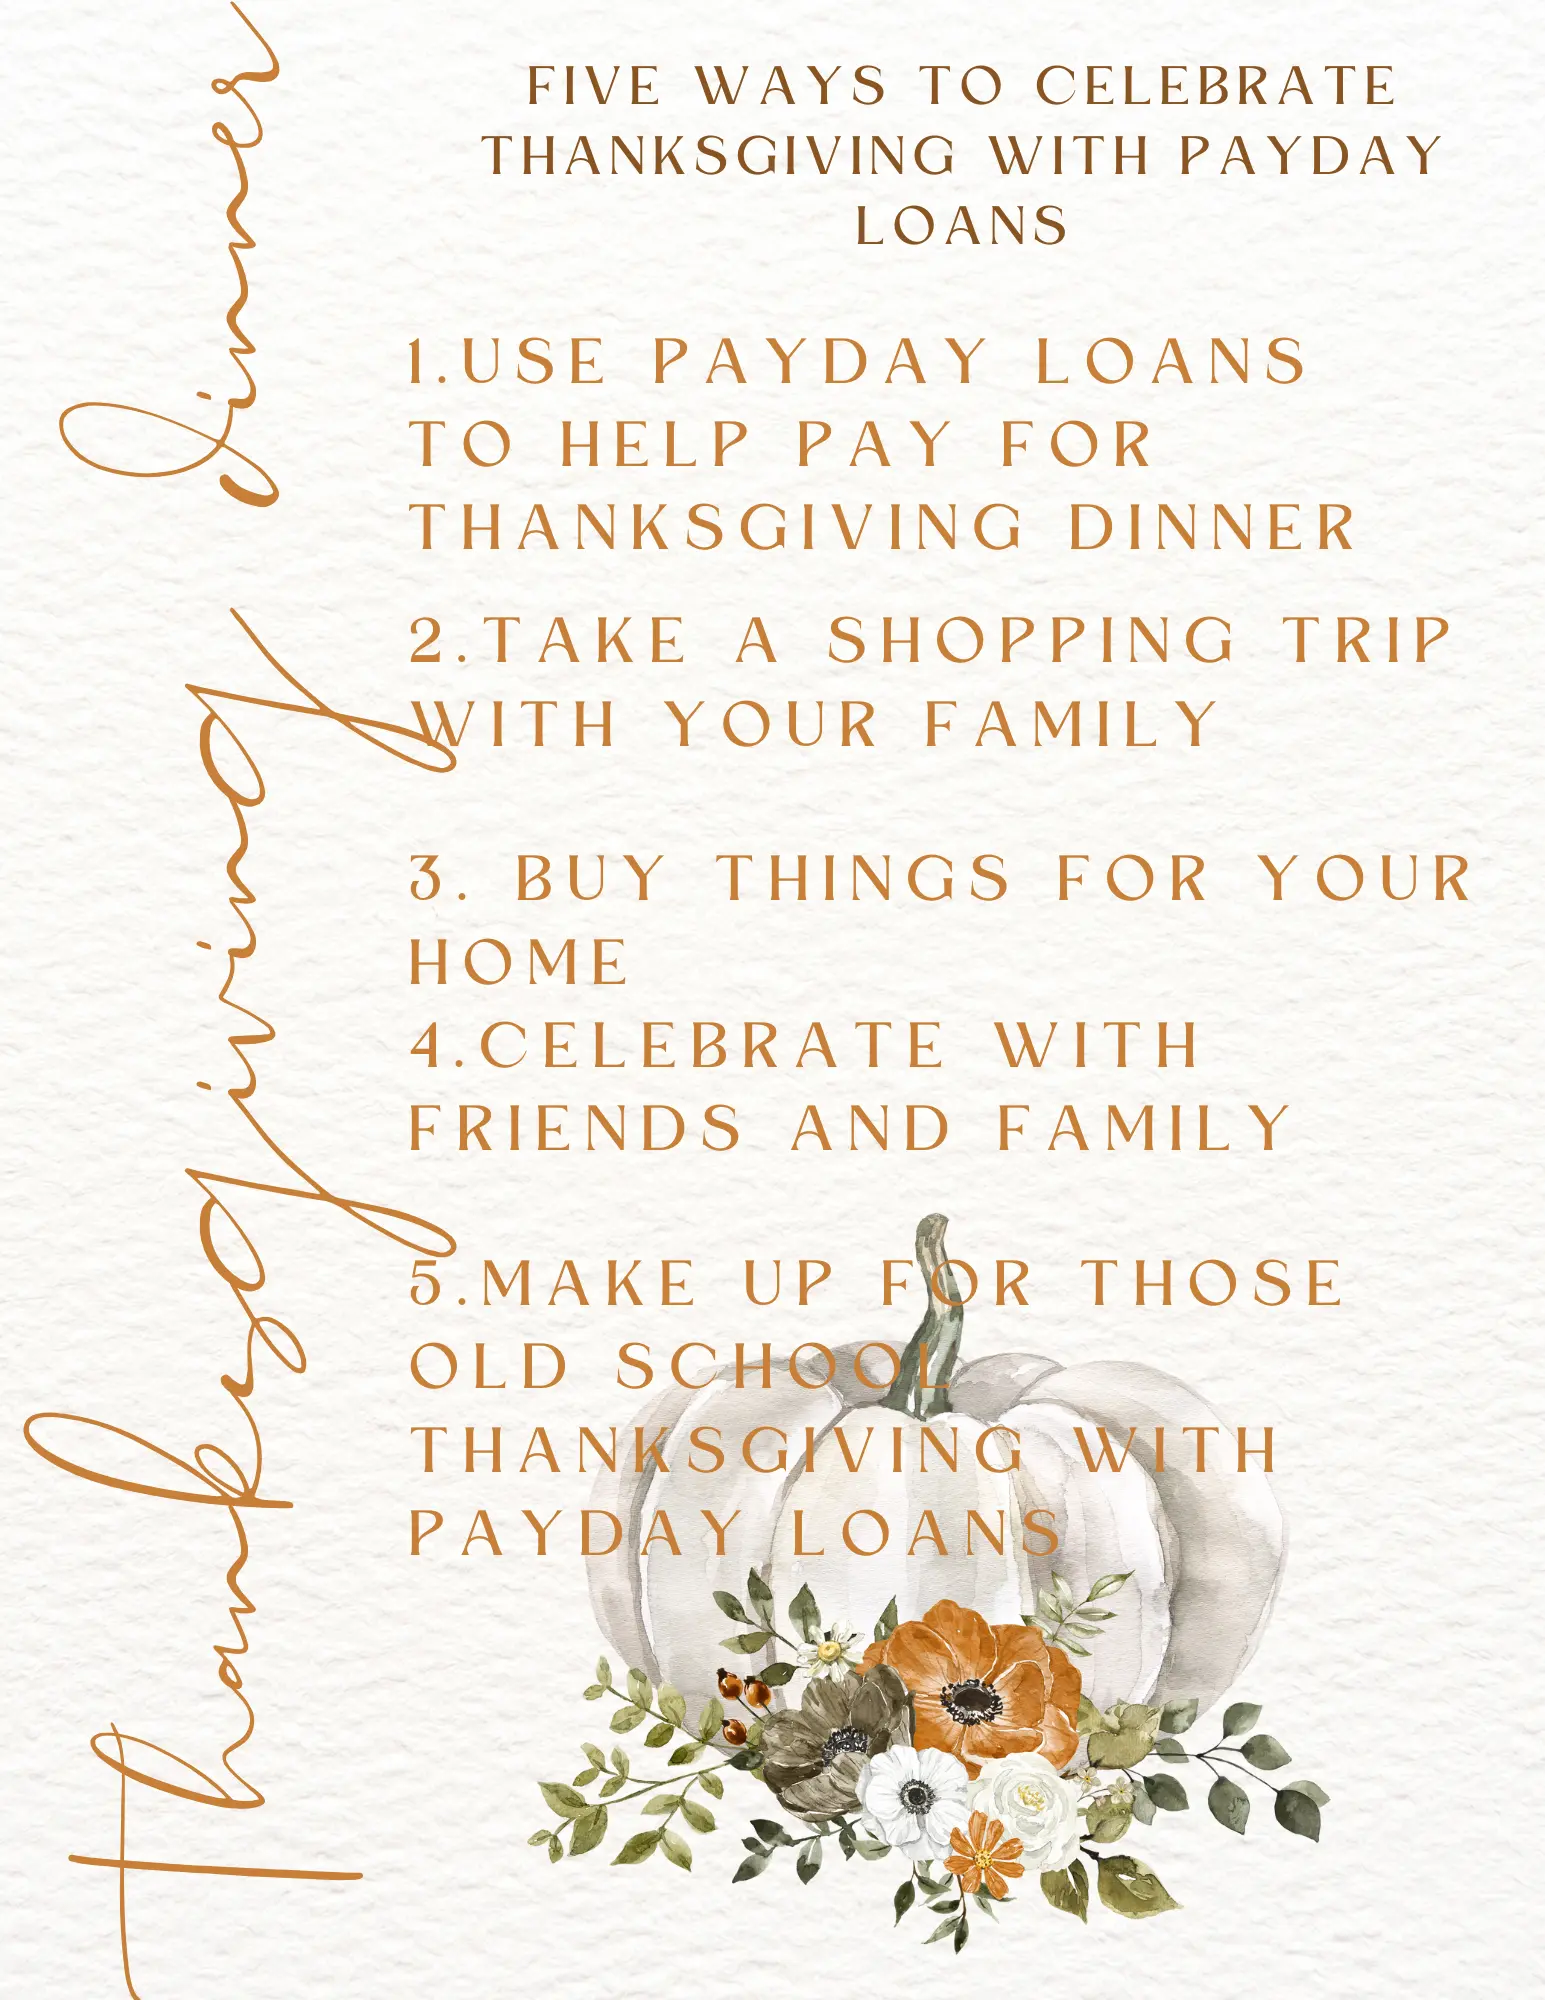 Five Ways to Celebrate Thanksgiving With Payday Loans 5 Points